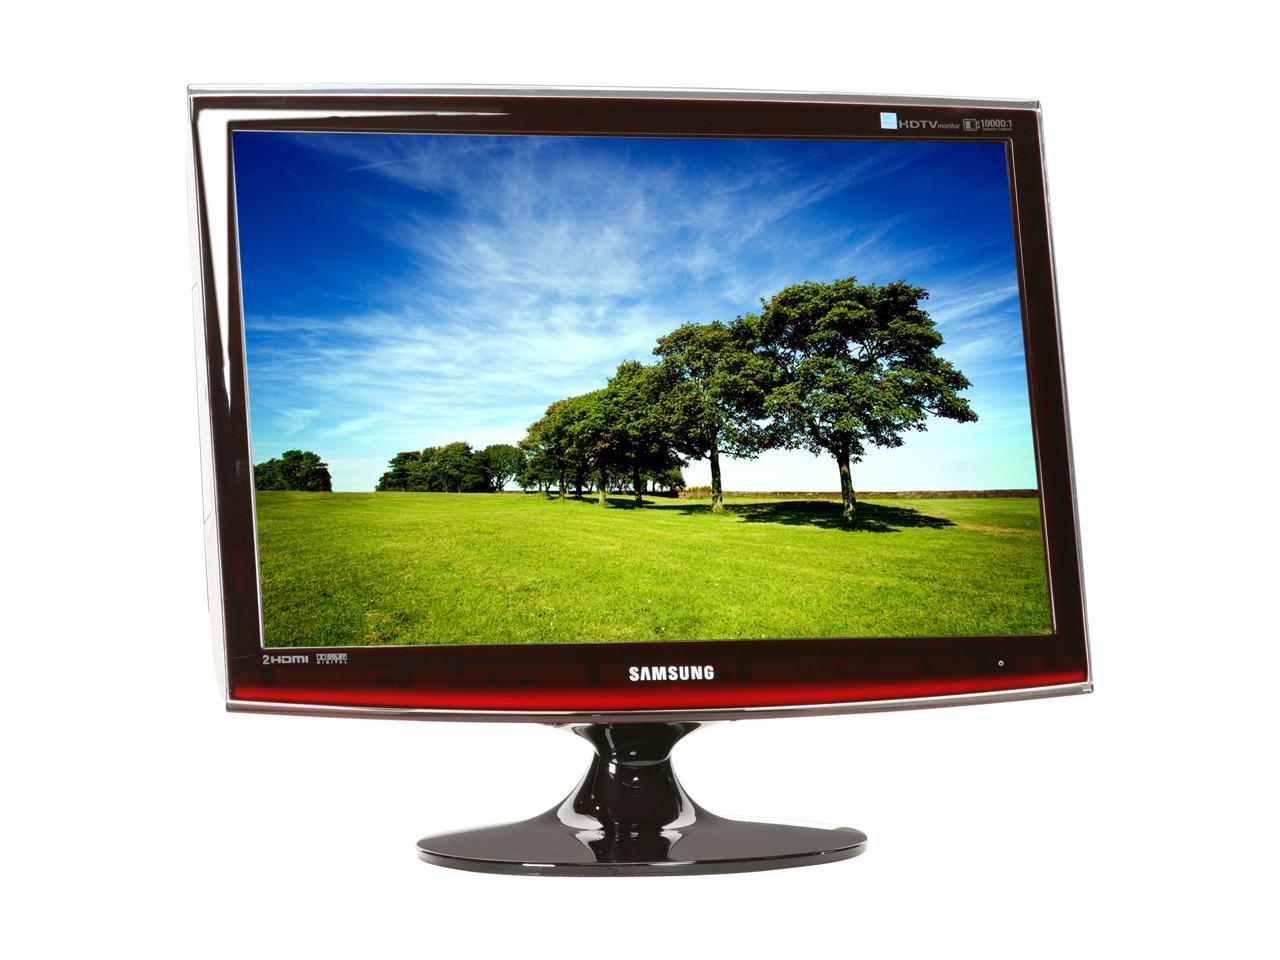 SAMSUNG ToC T220HD Rose Black 22" 5ms HDMI Widescreen HDTV Monitor 300 cd/m2 DC 10000:1 Built in Tuner & Dolby Digital Speakers - Newegg.com